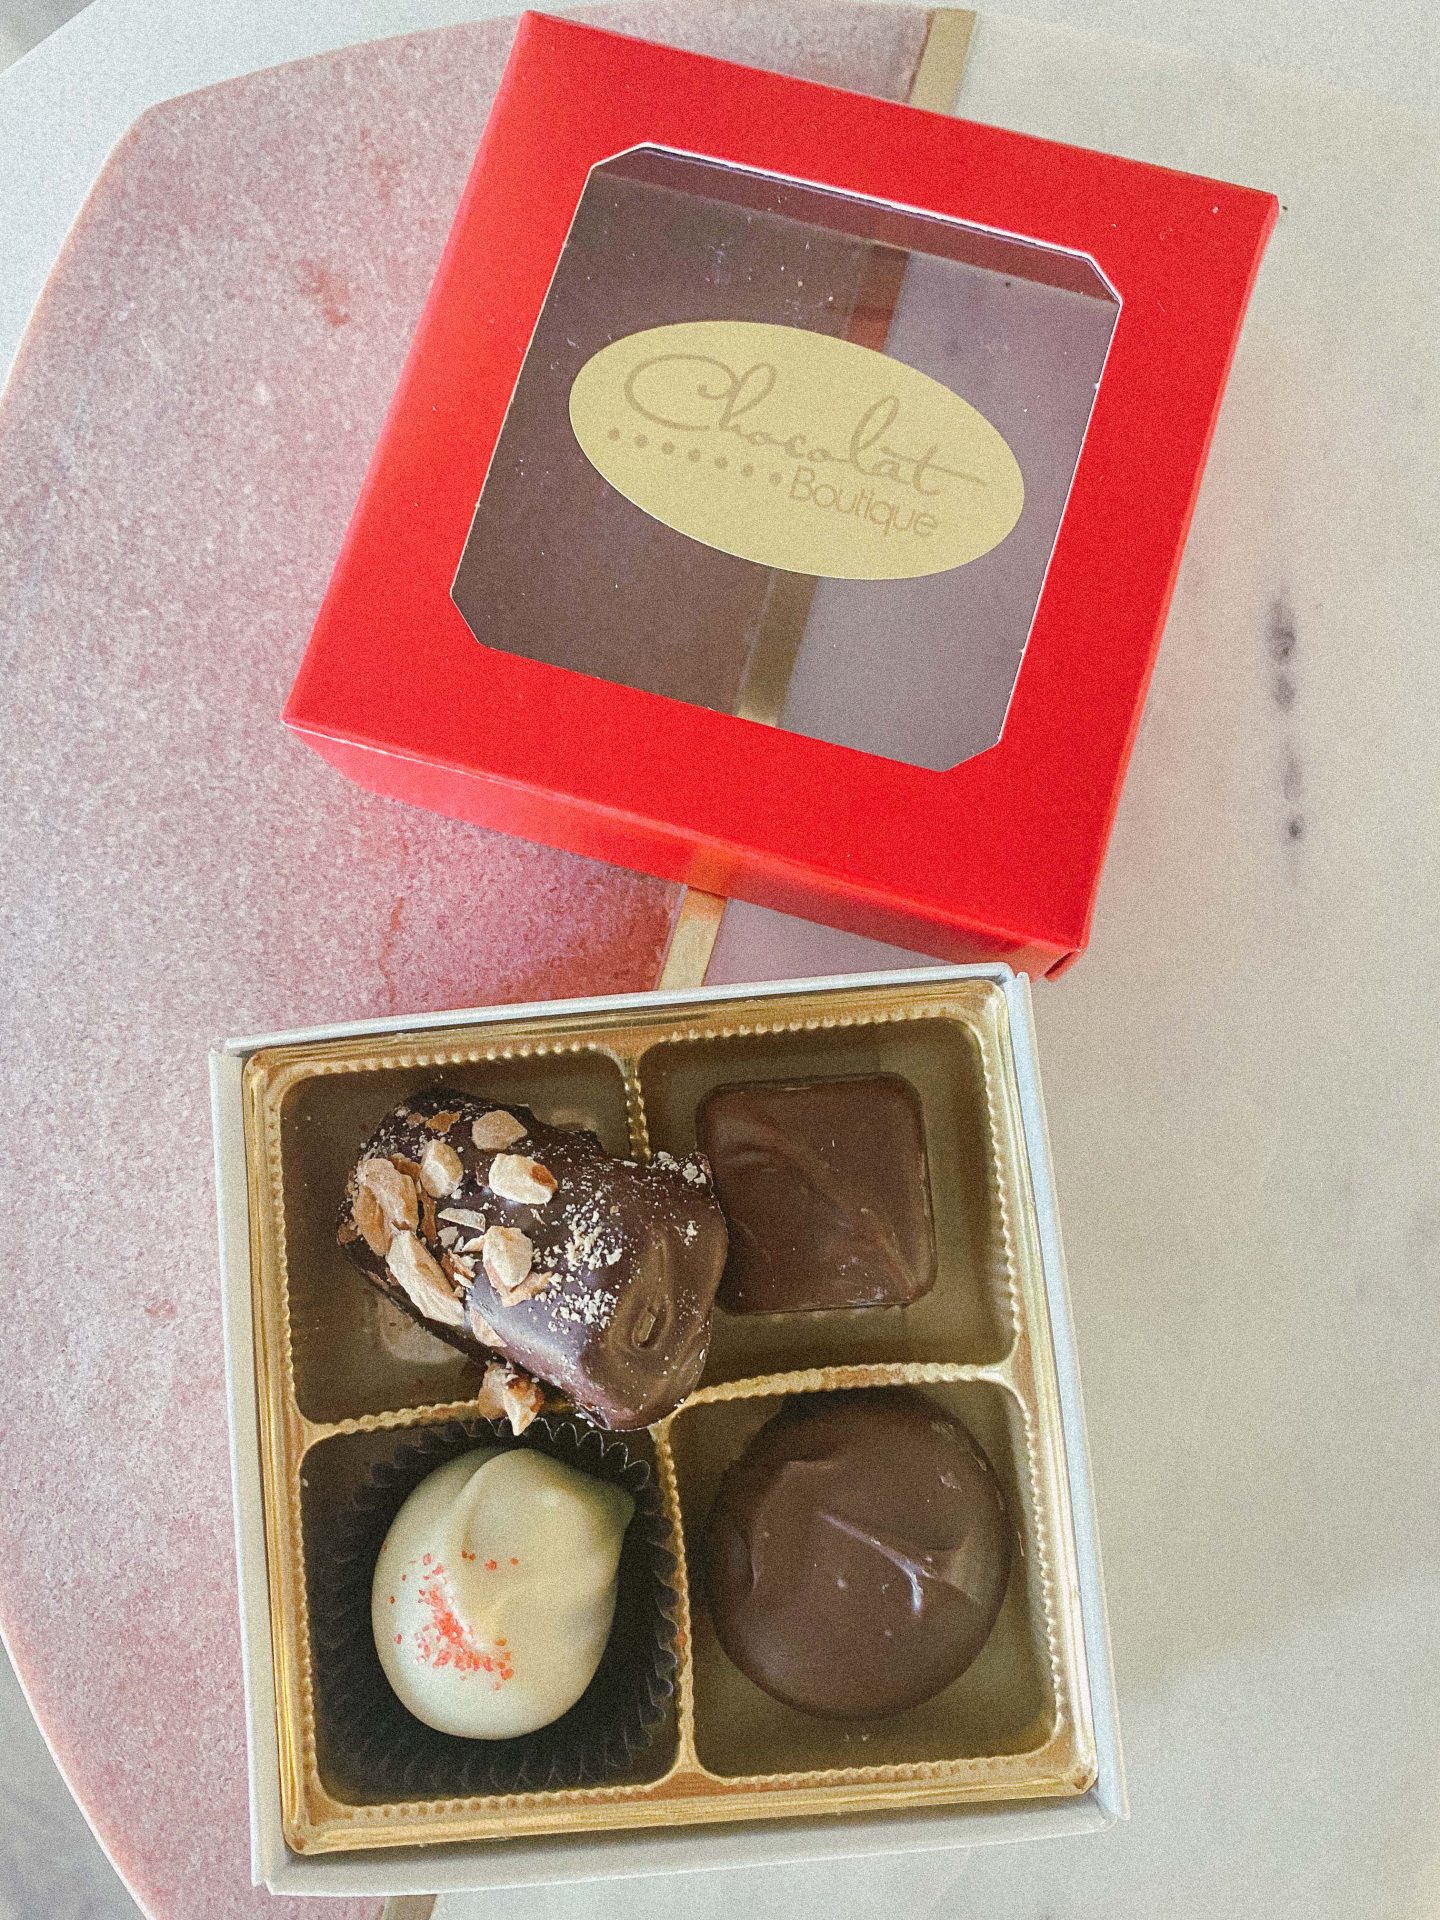 chocolat boutique, baxter village, baxter community, chocolate and dessert shop fort mill sc, truffles, the best of fort mill sc